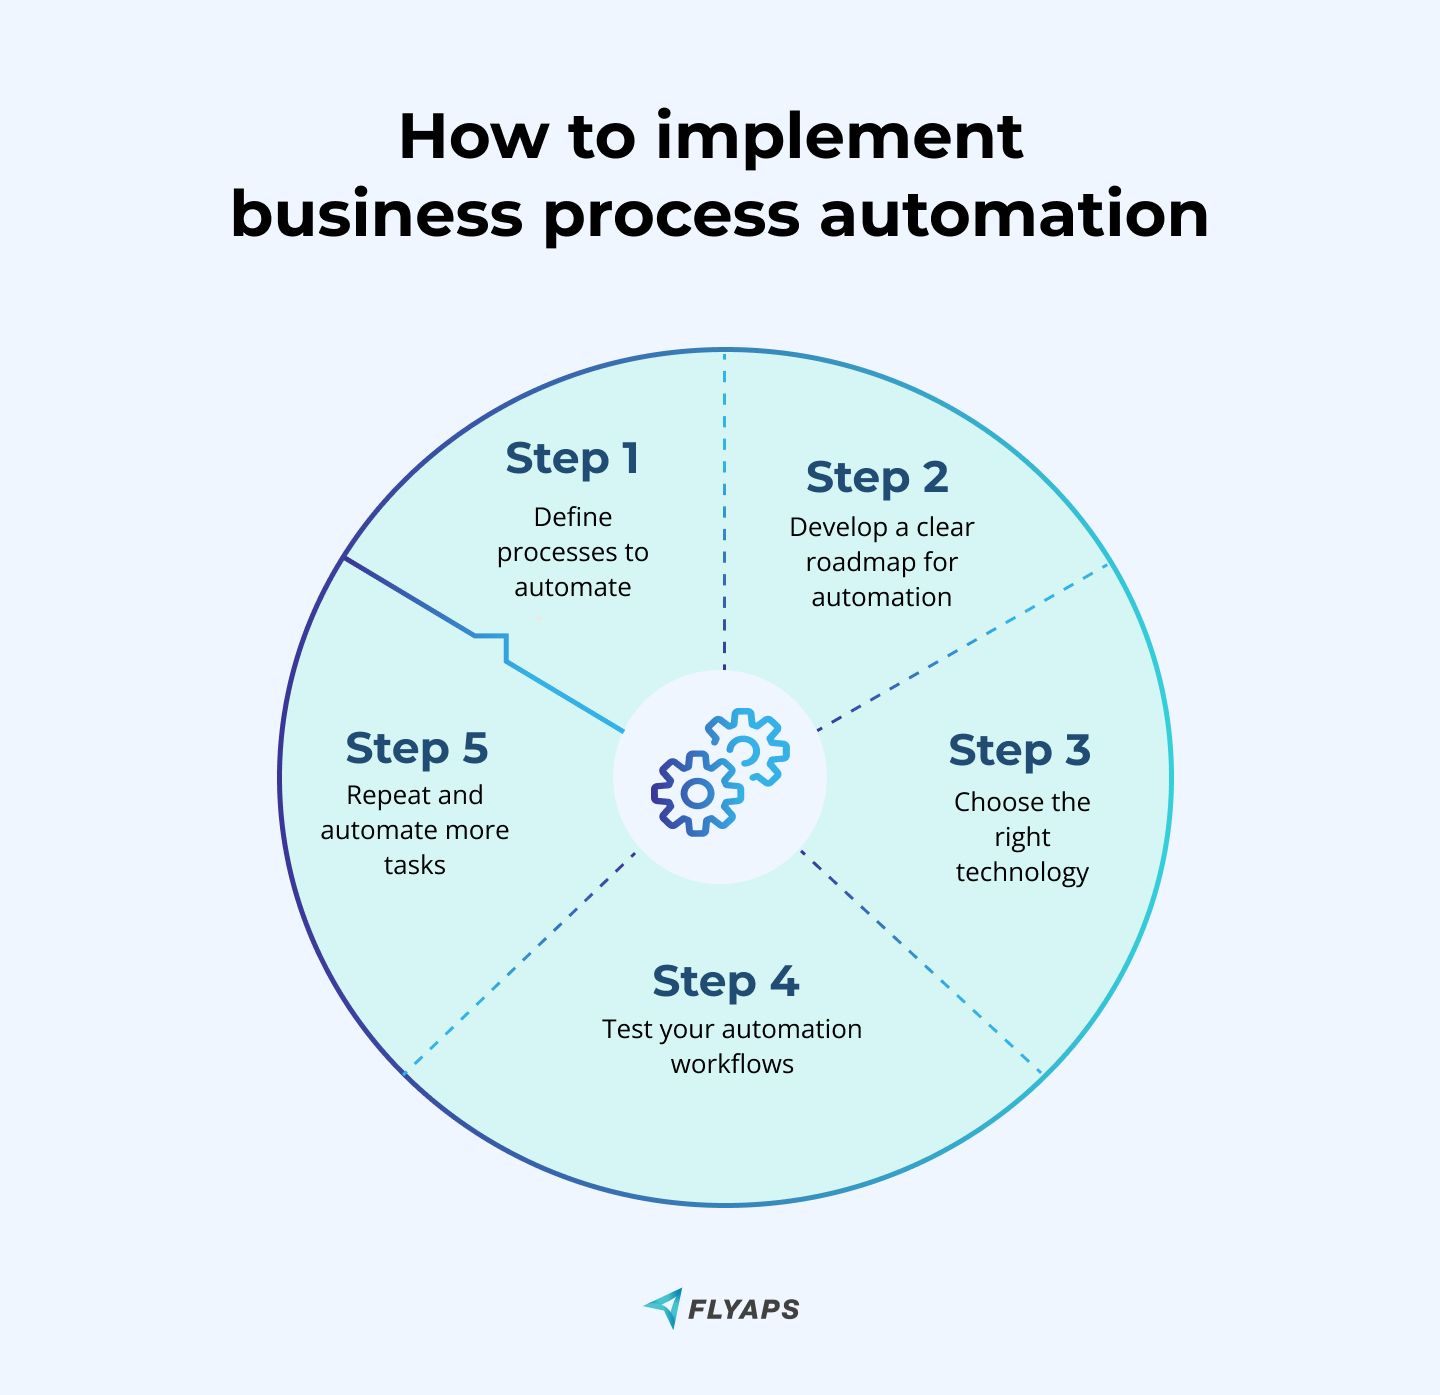 How to implement business process automation